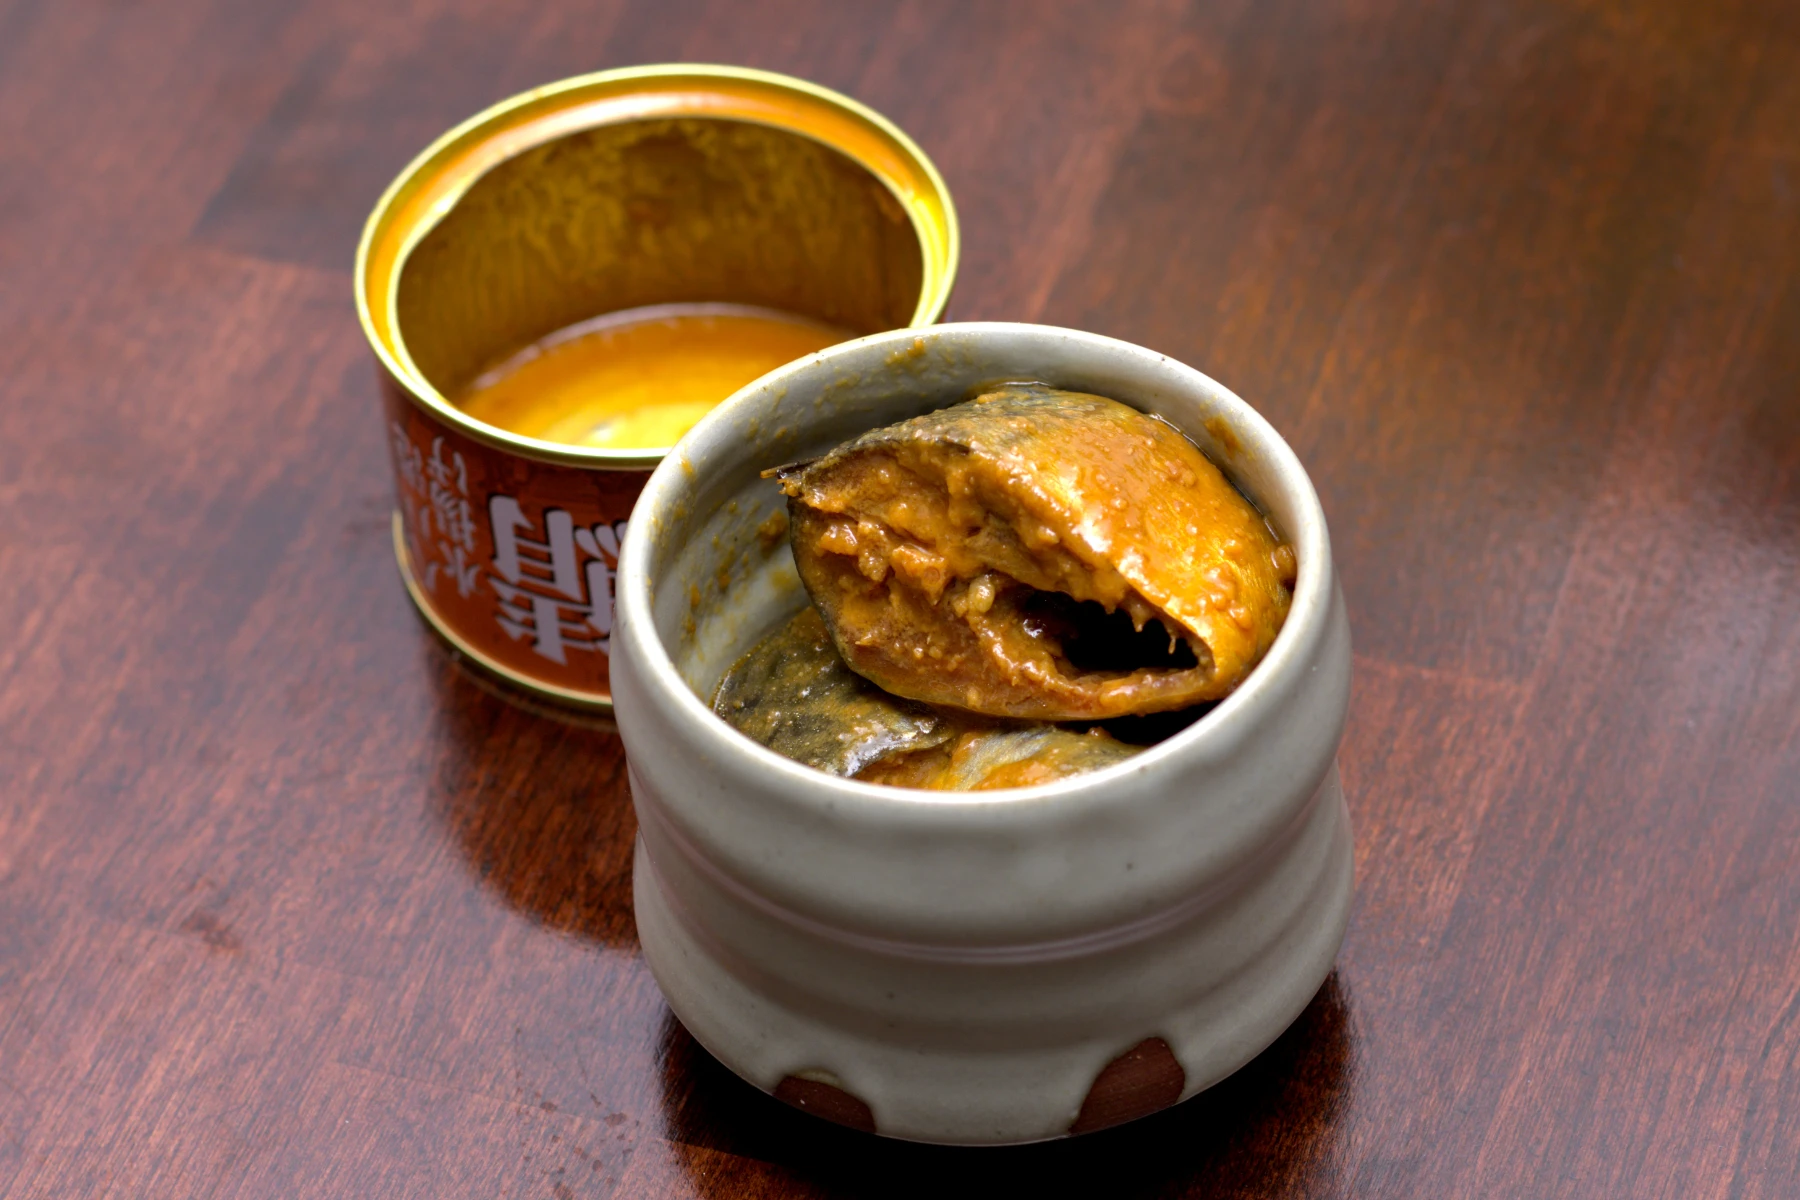 Mackerel out of the can and served in a separate dish covered in sauce.